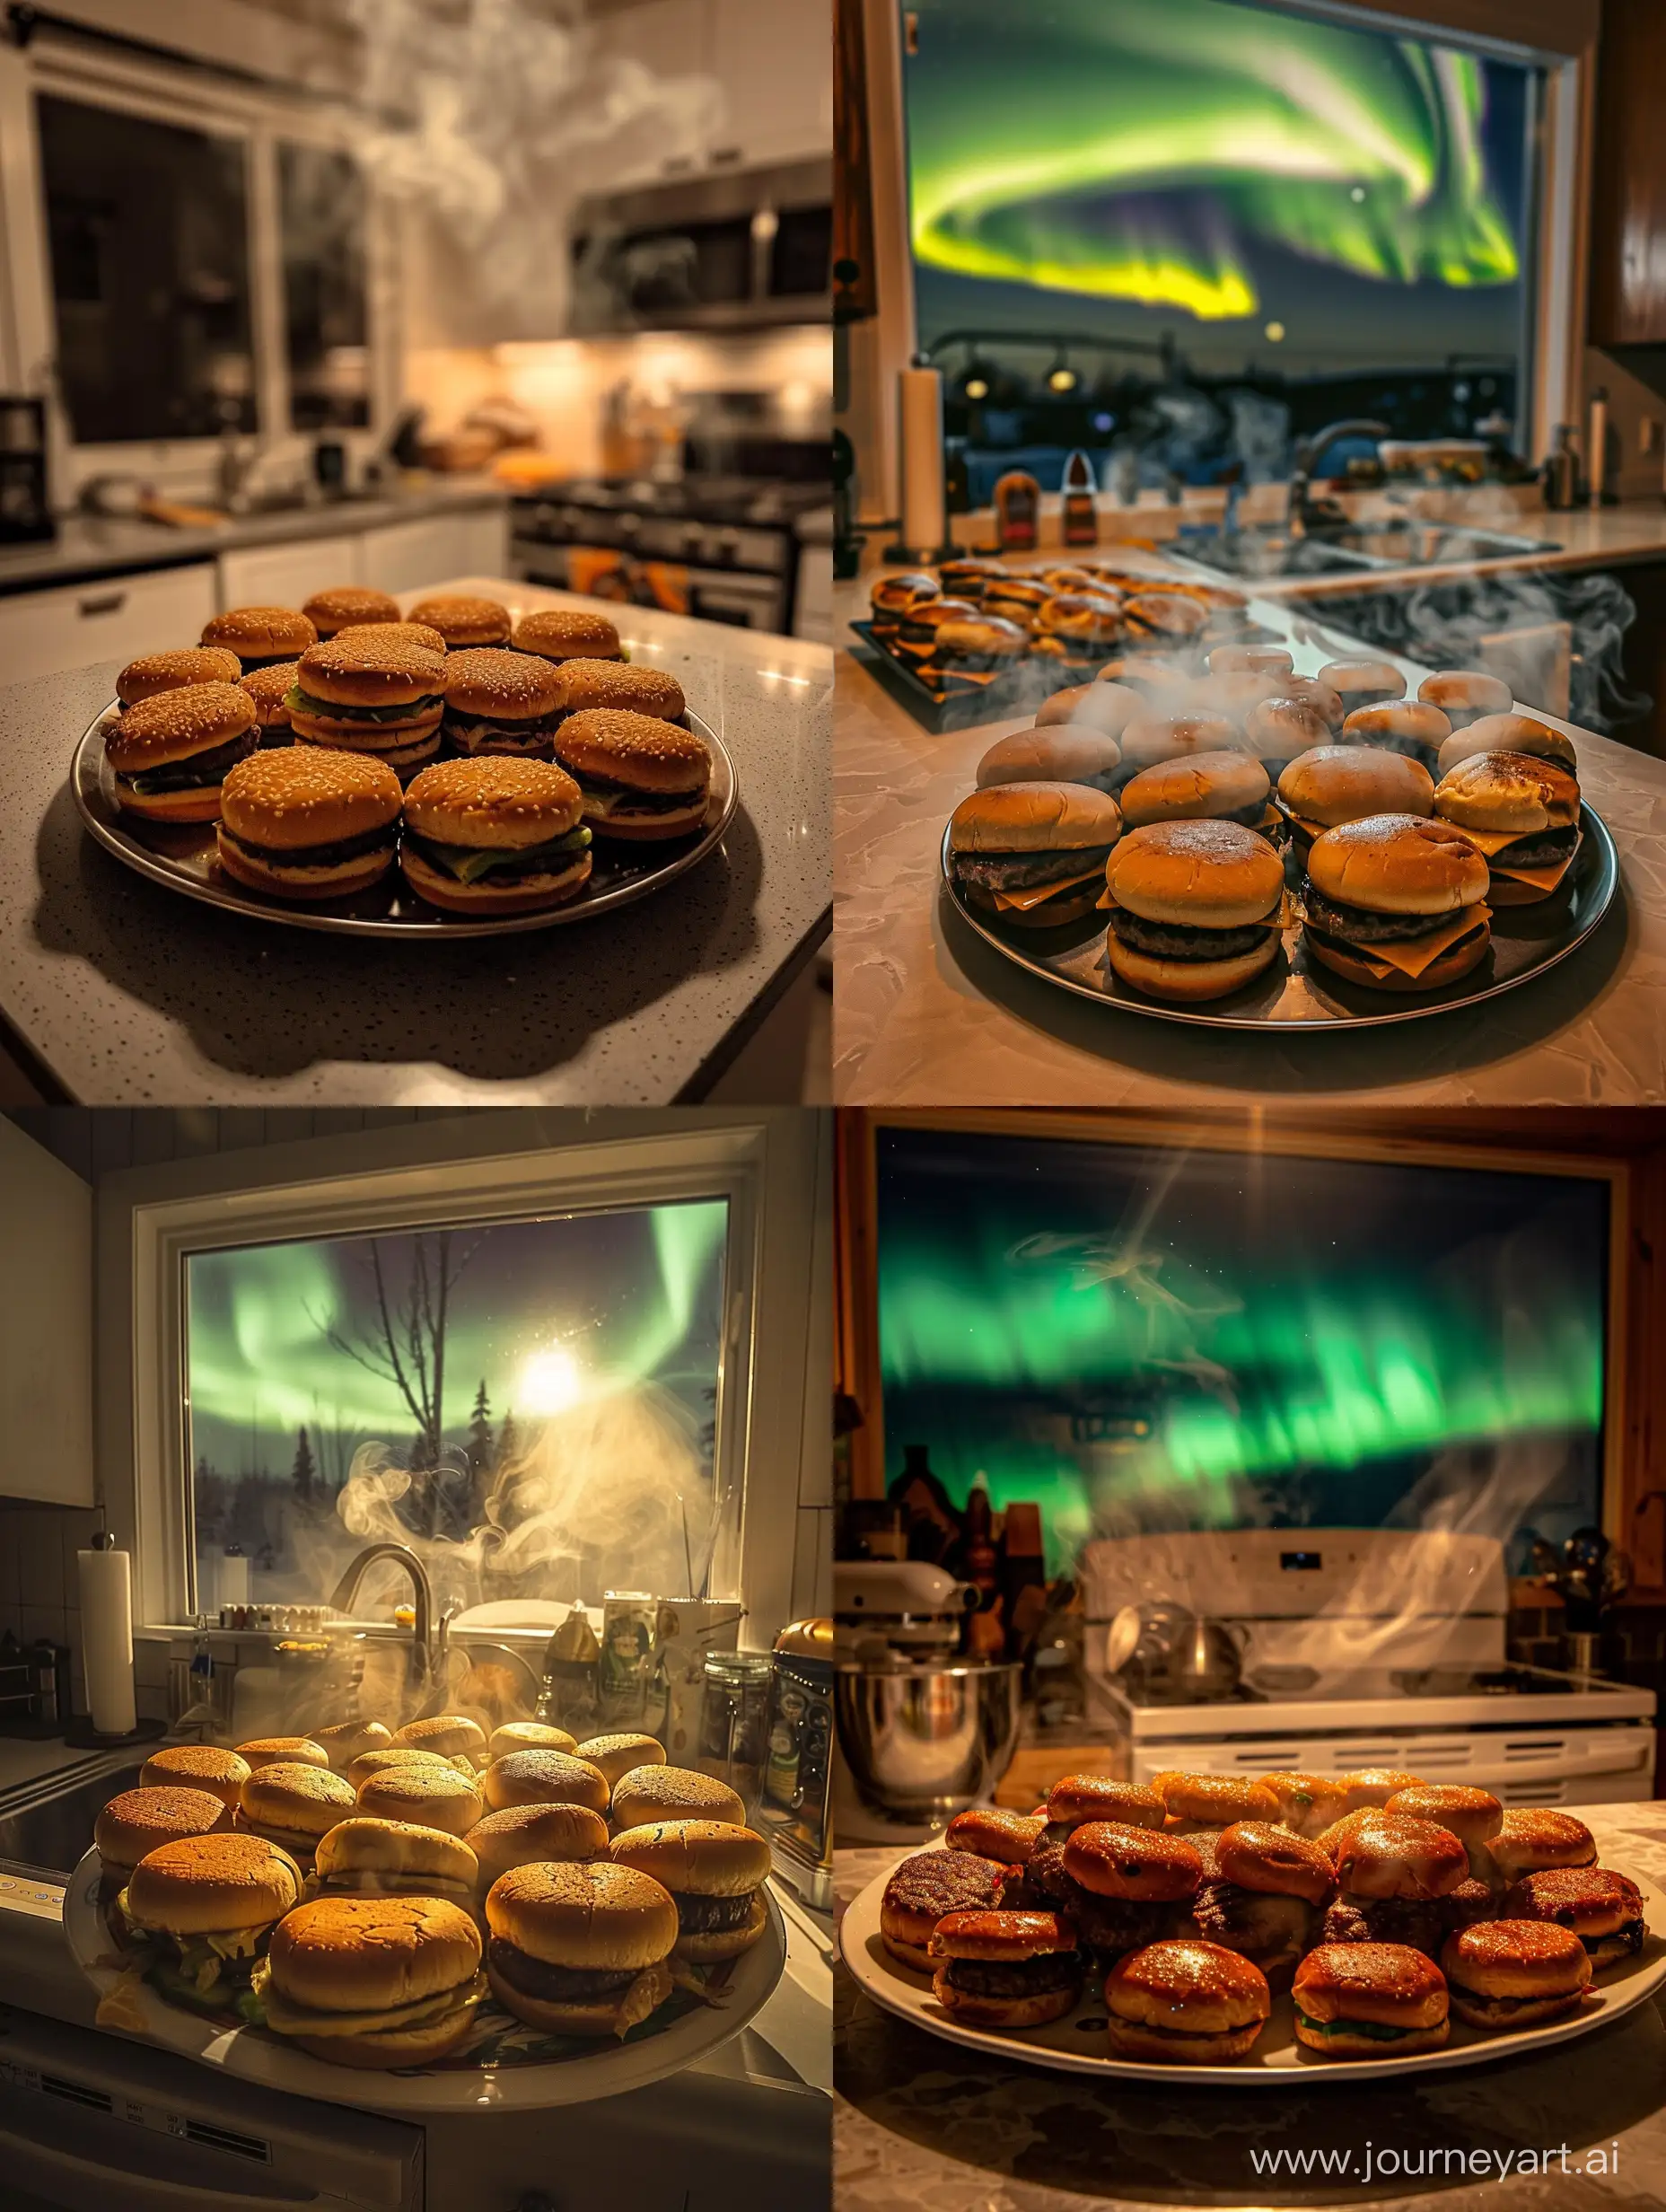 Aurora Borealis is literally inside the kitchen, all of it. On the kitchen counter there is a platter of many hamburgers that are steaming.